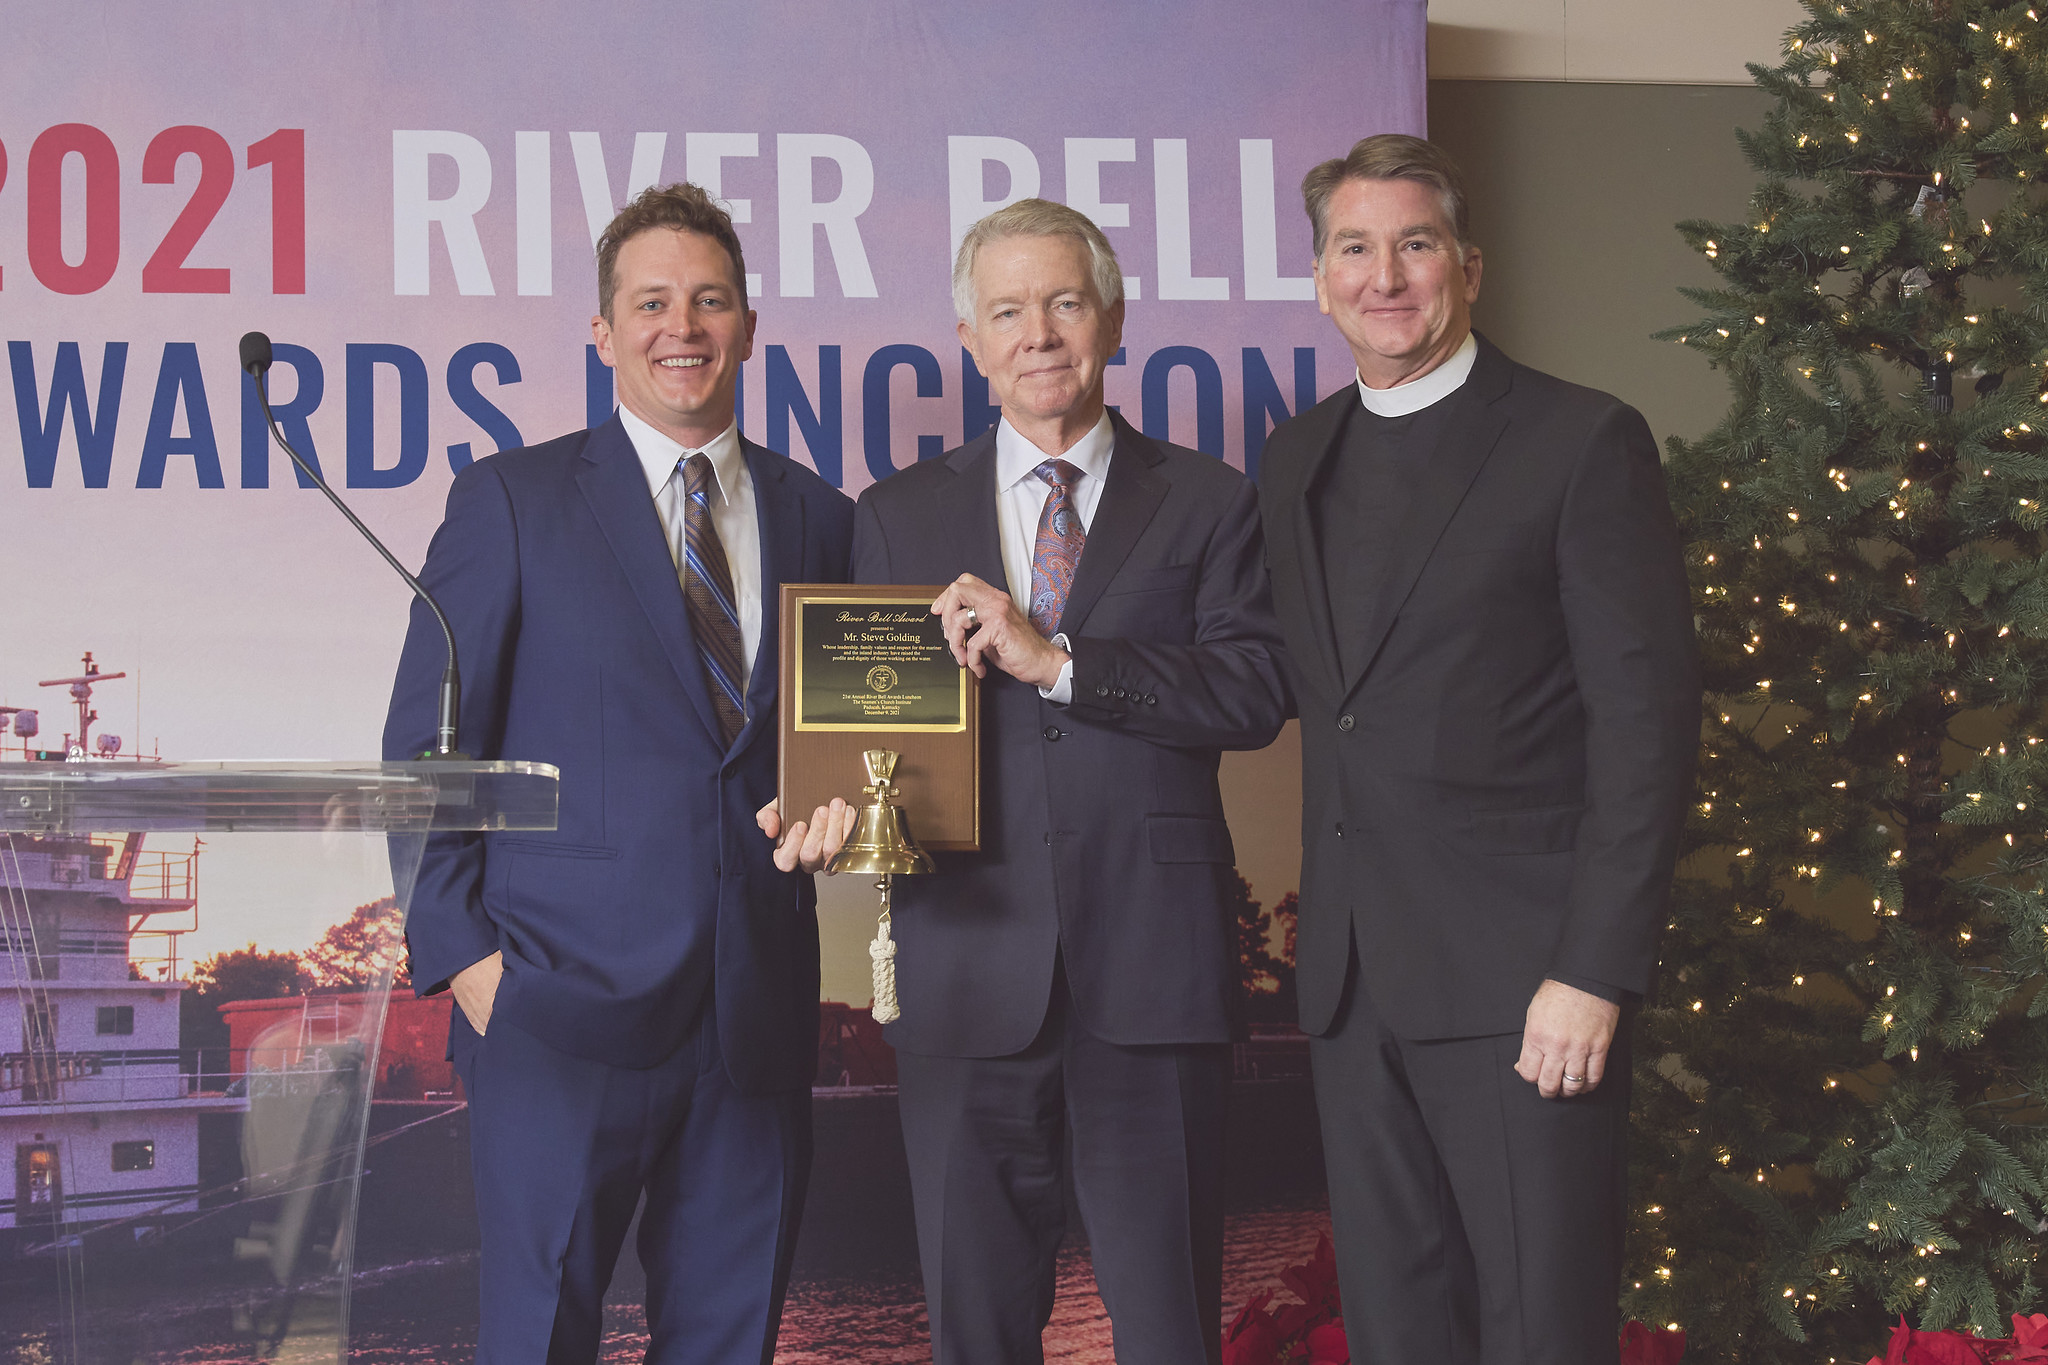 River Bell Awards Luncheon